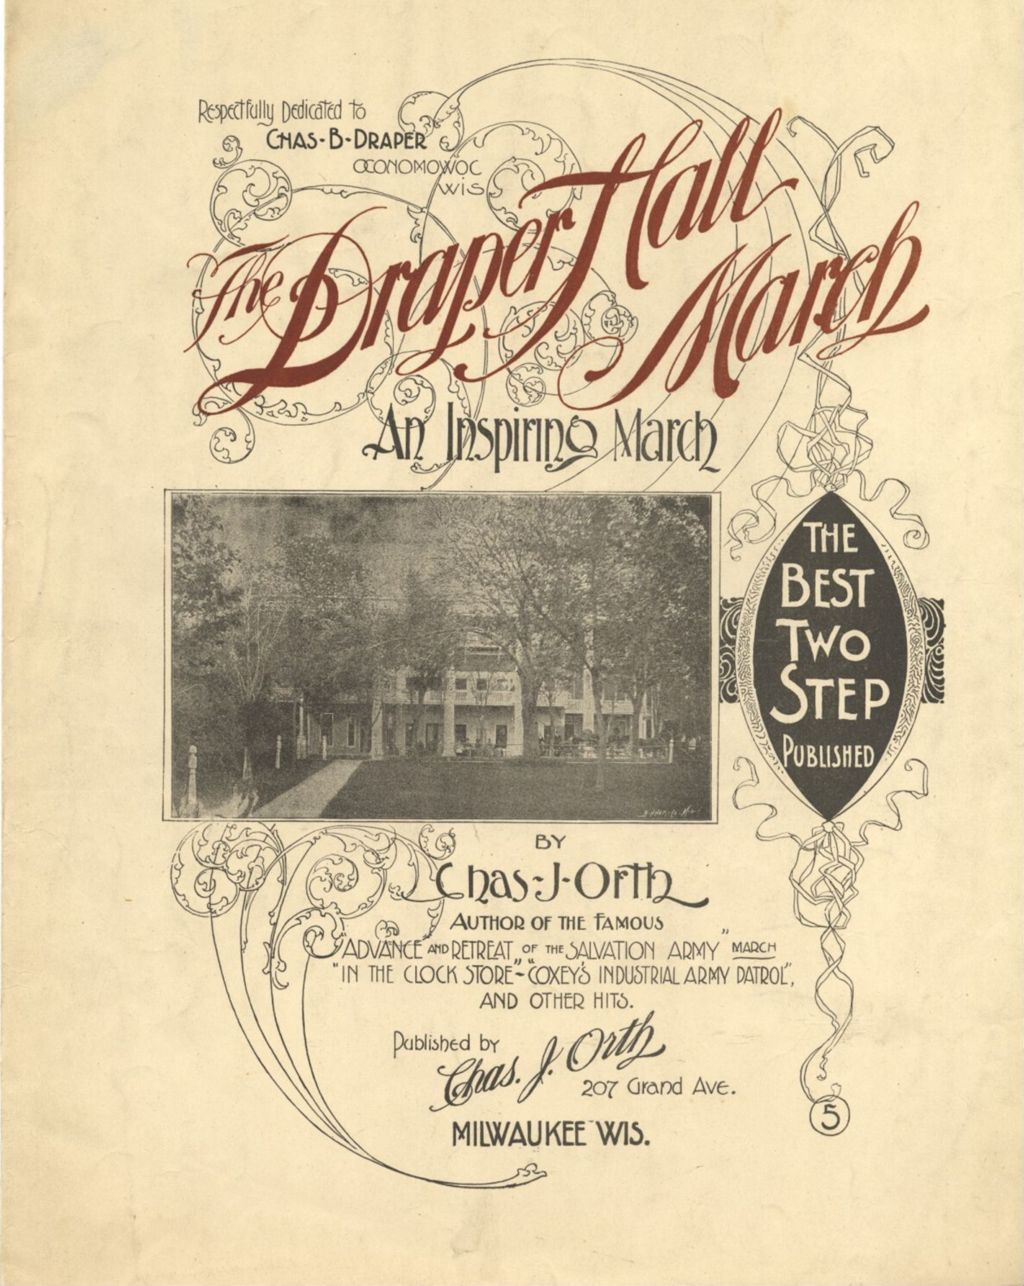 Miniature of Draper Hall March (Two Step)